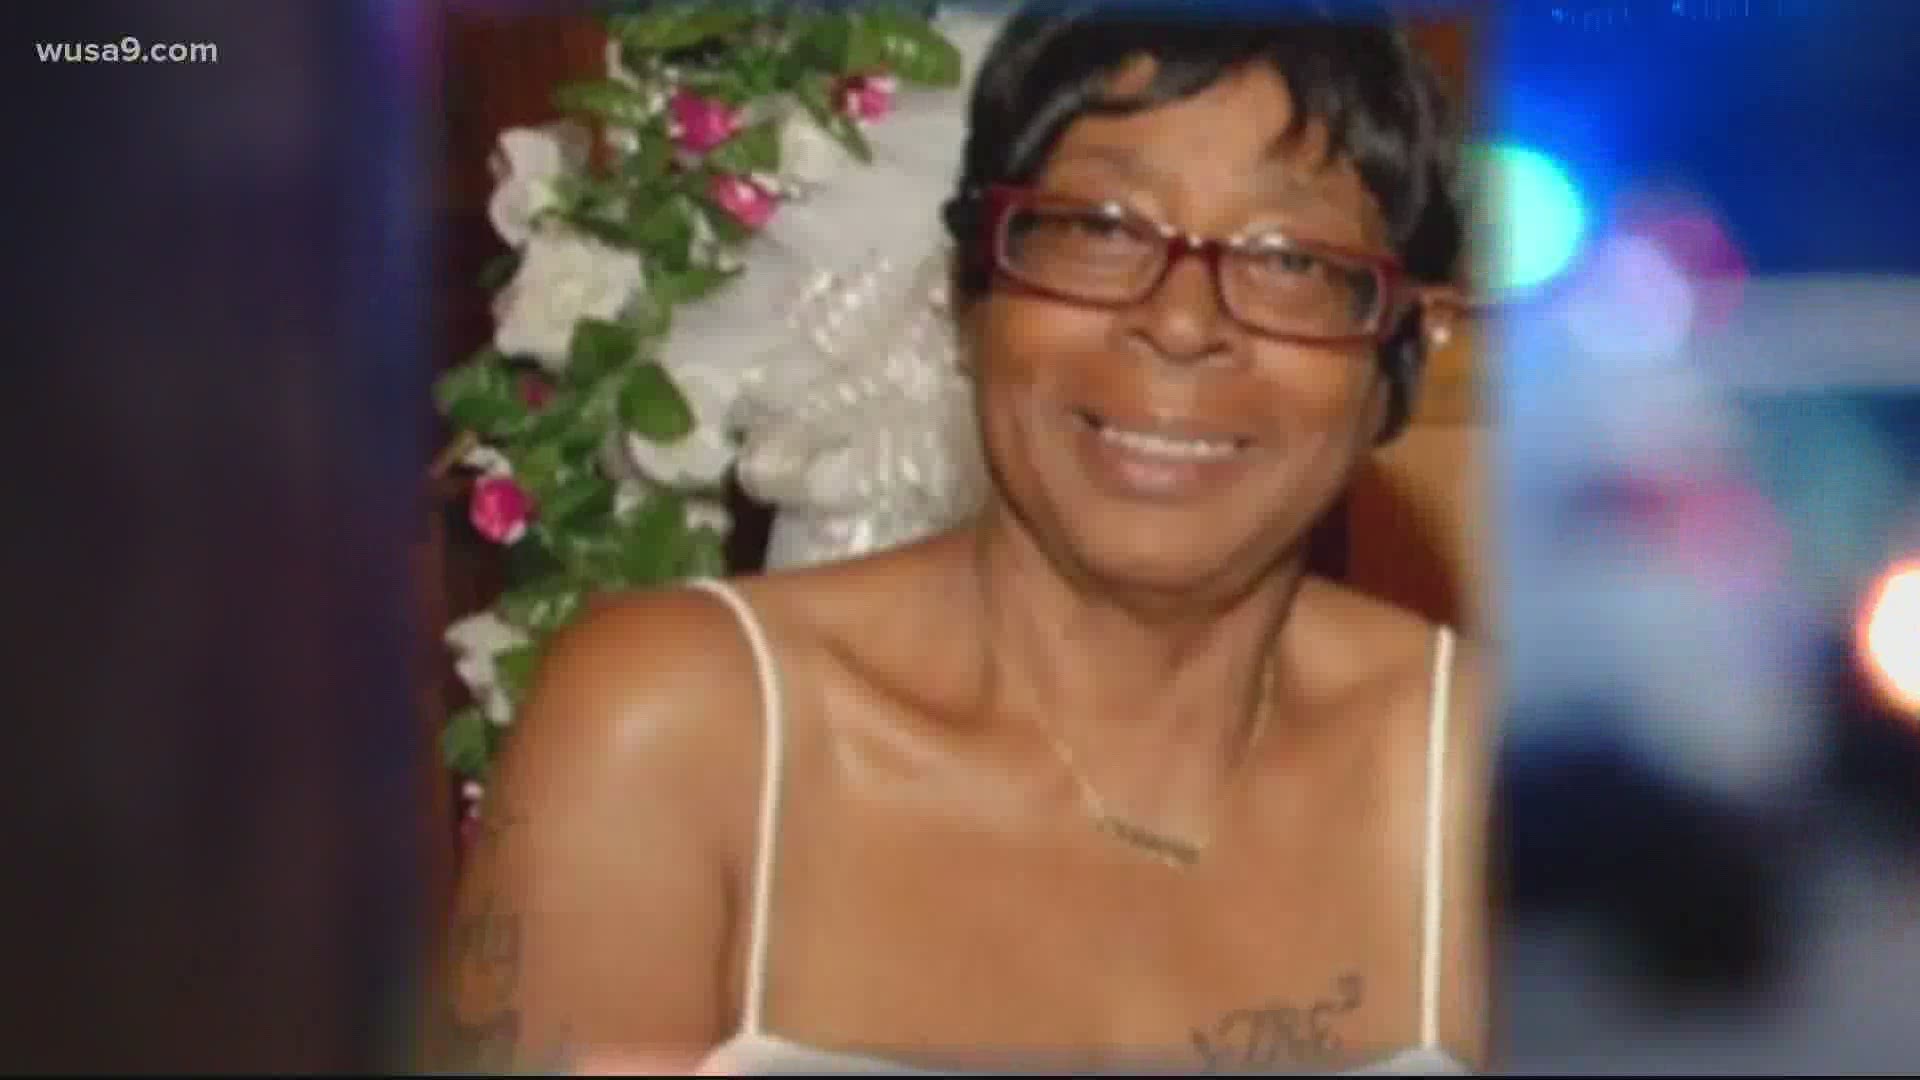 71-year-old Sheila Lucas, who survived COVID-19, was killed trying to break up a fight outside a grocery store.